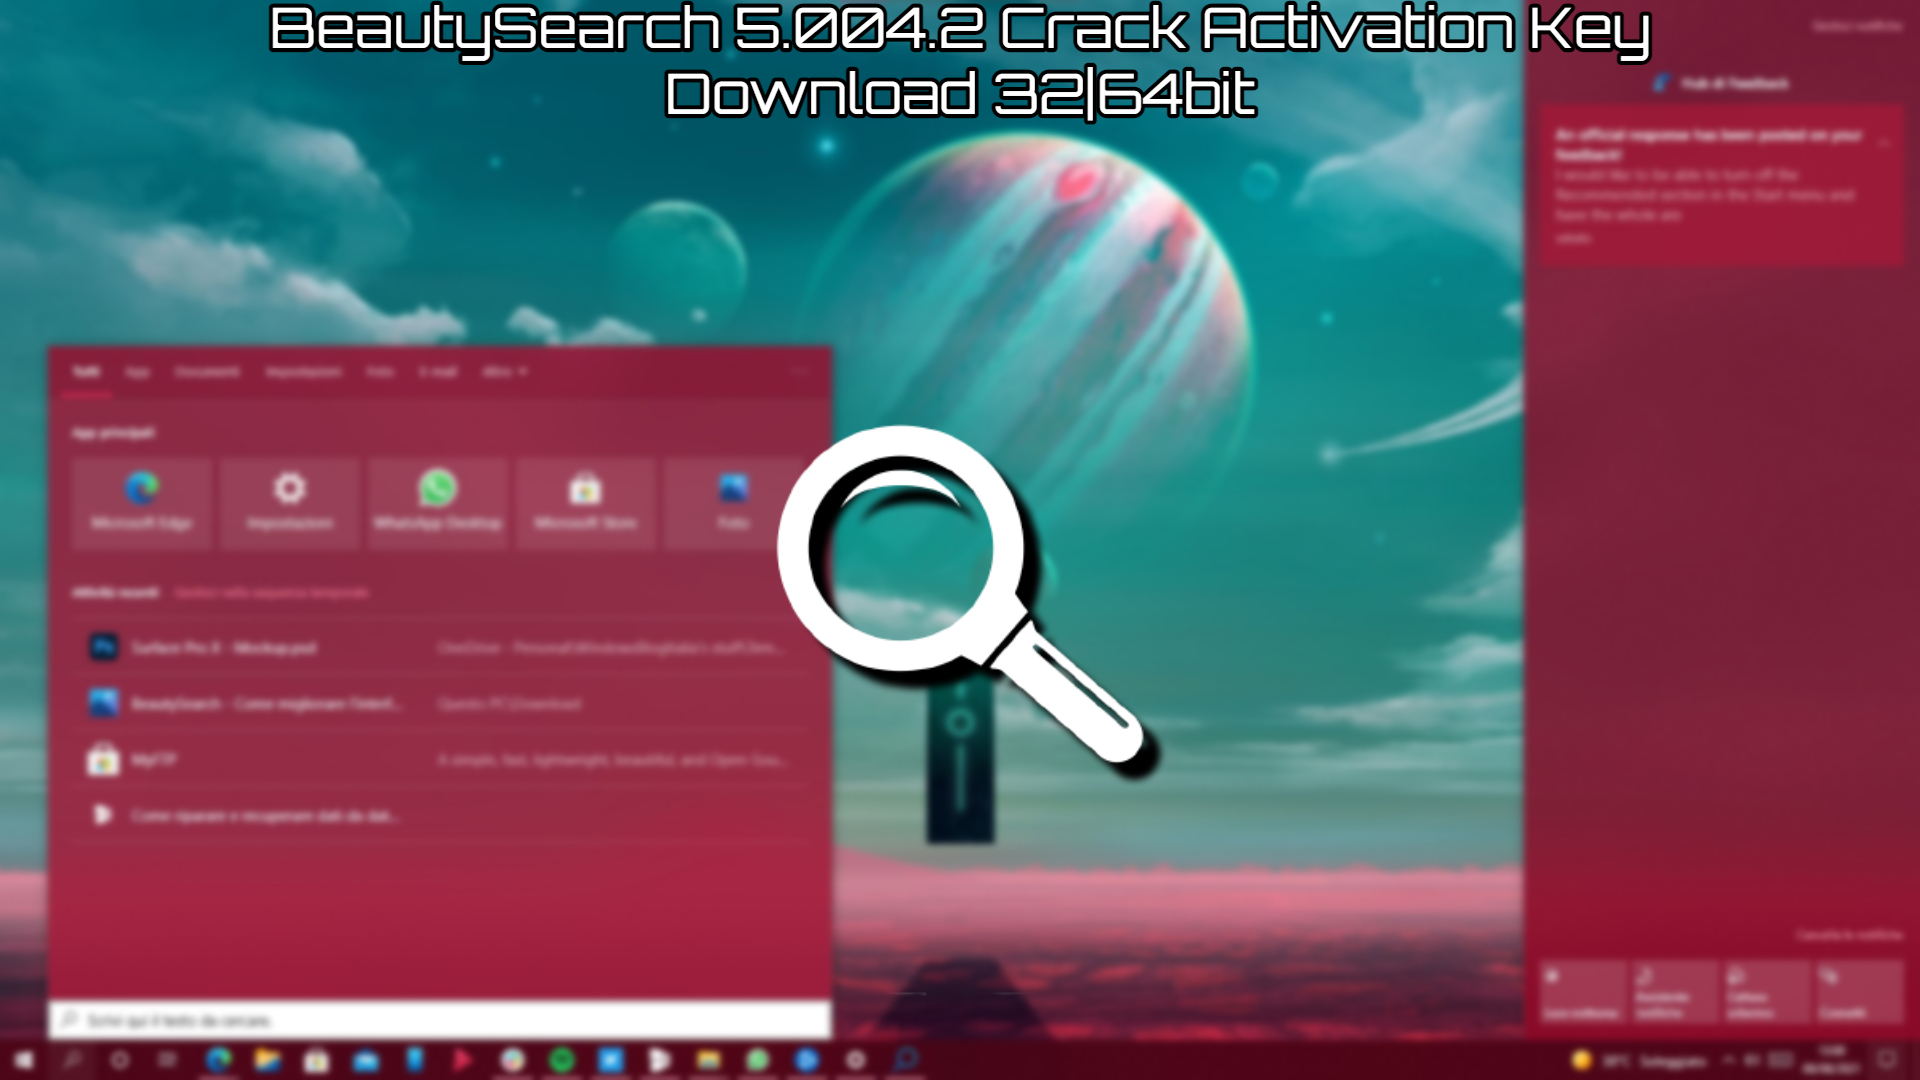 You are currently viewing BeautySearch 5.004.2 Crack Activation Key Download 32|64bit